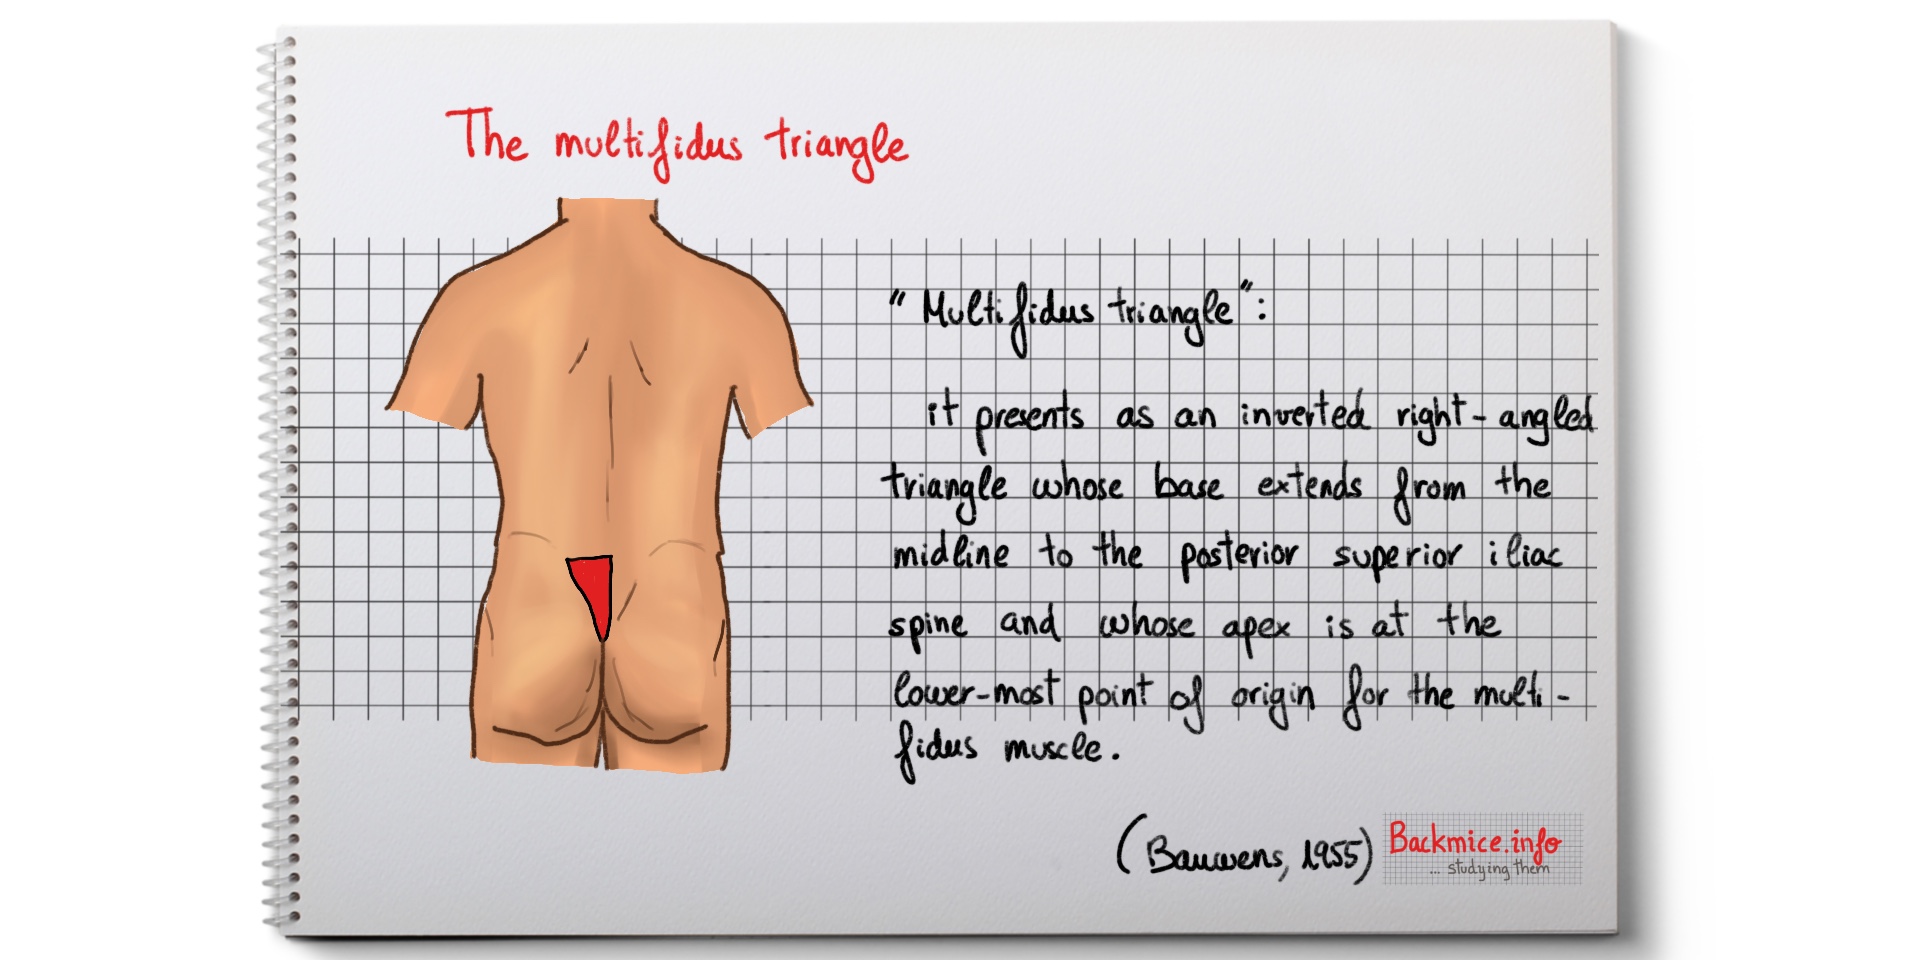 The multifidus triangle (low back pain)